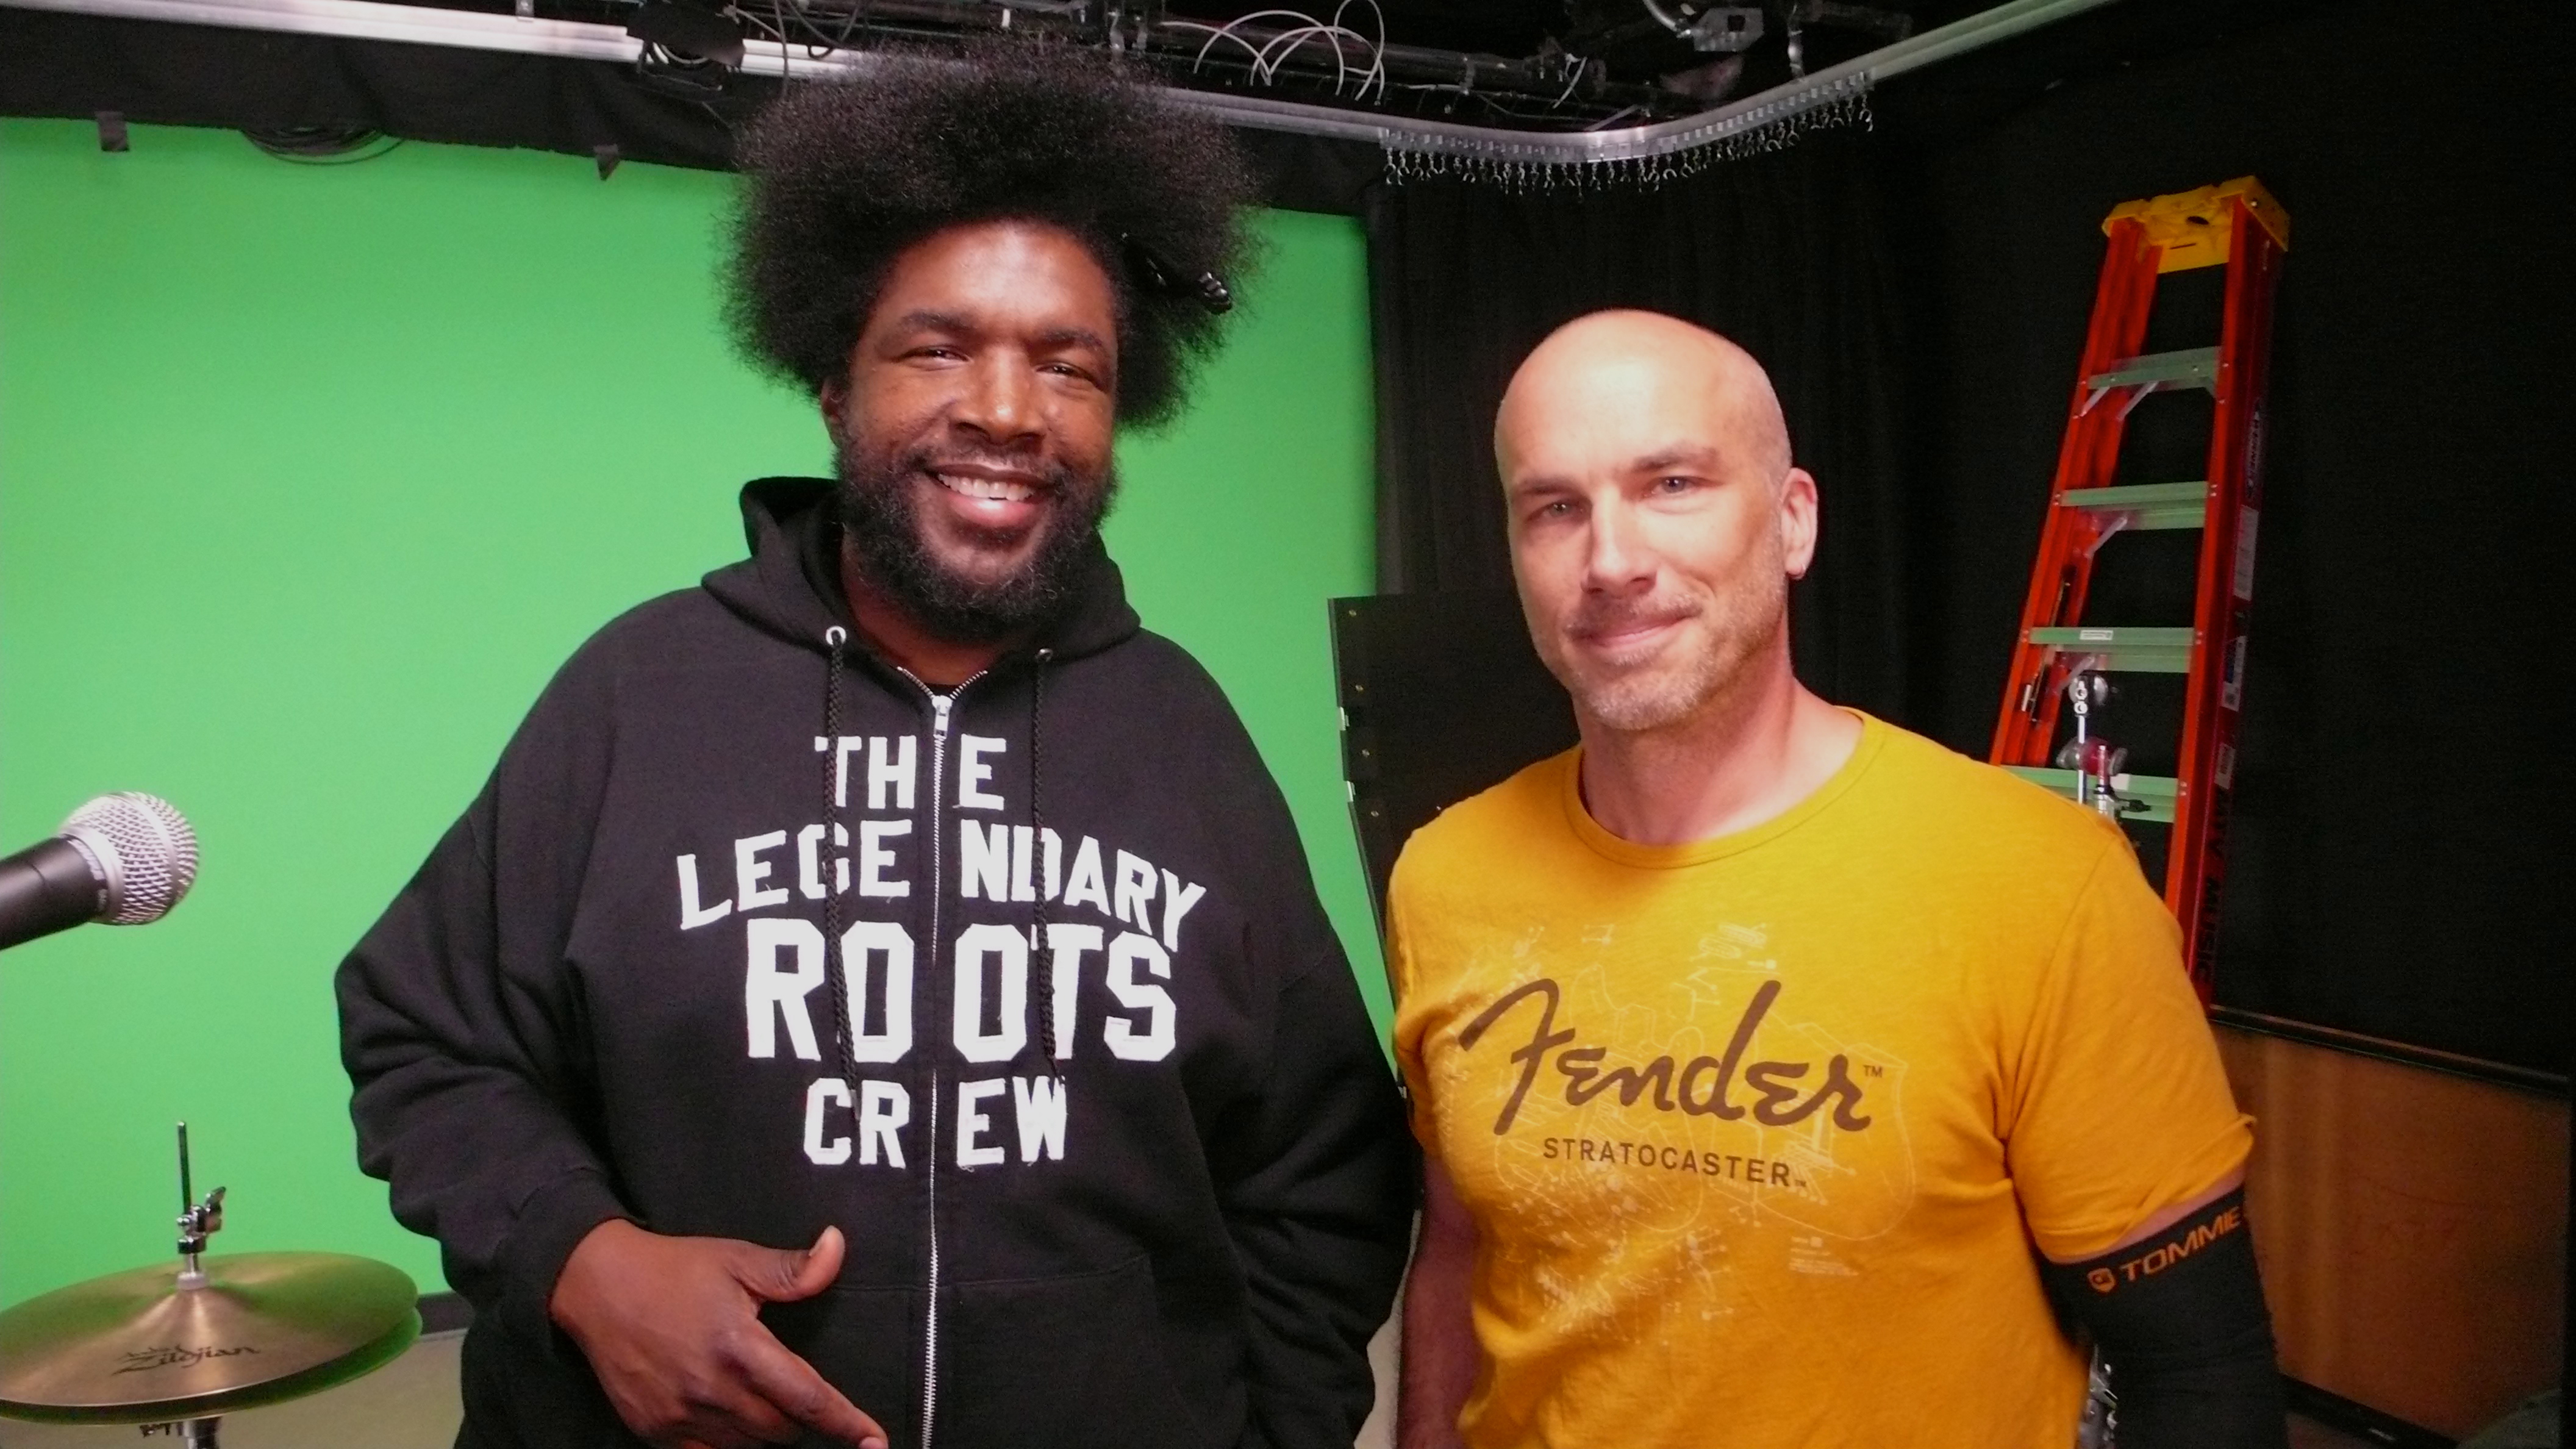 With Questlove for the Philly Jam promos